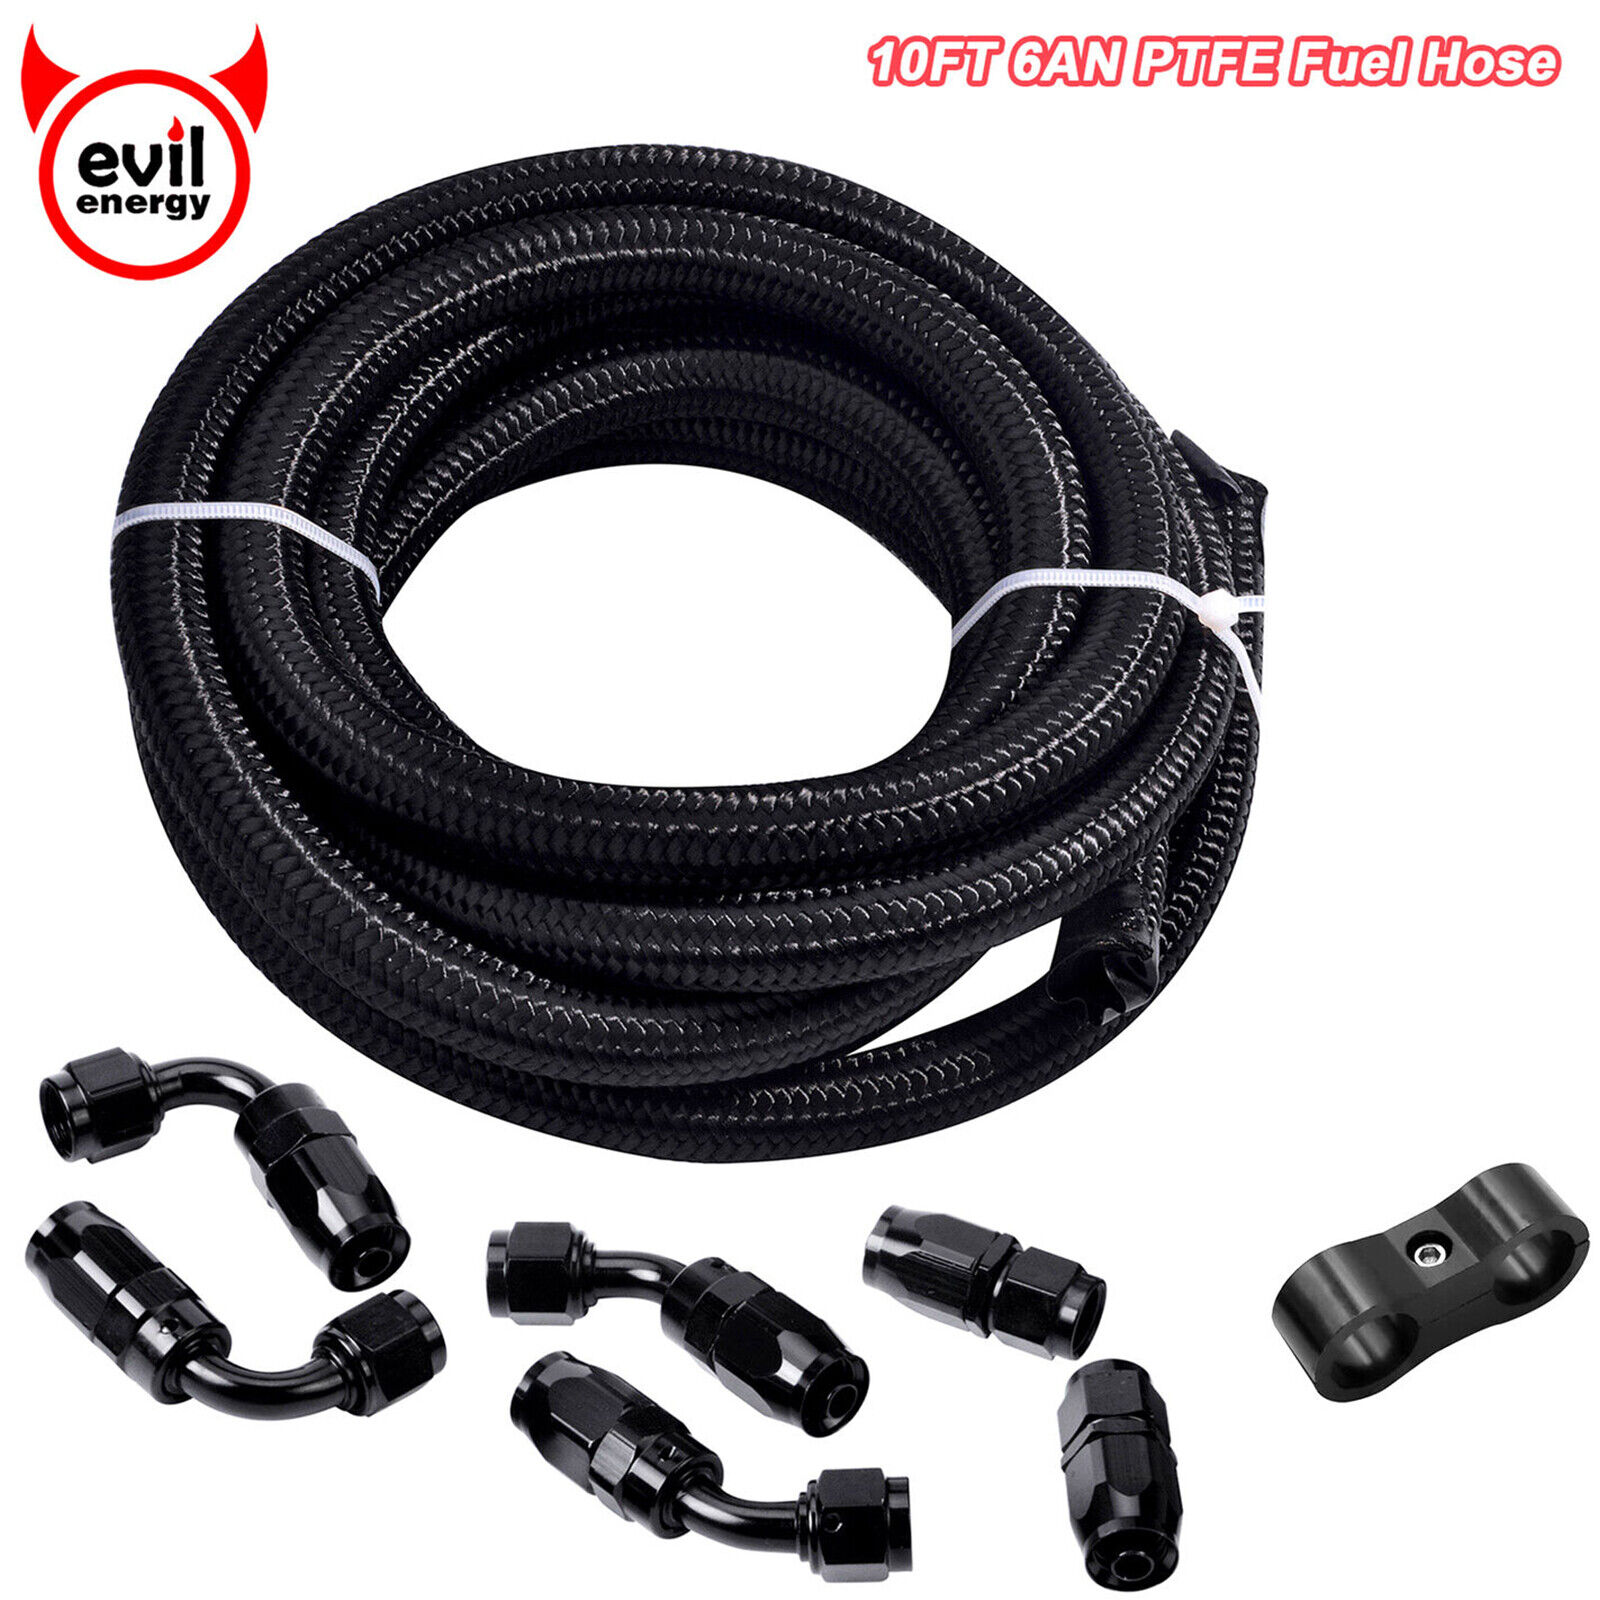 AN6 6AN Nylon Stainless Steel Braided Fuel Hose Fuel Adapter Kit Oil Line 10FT